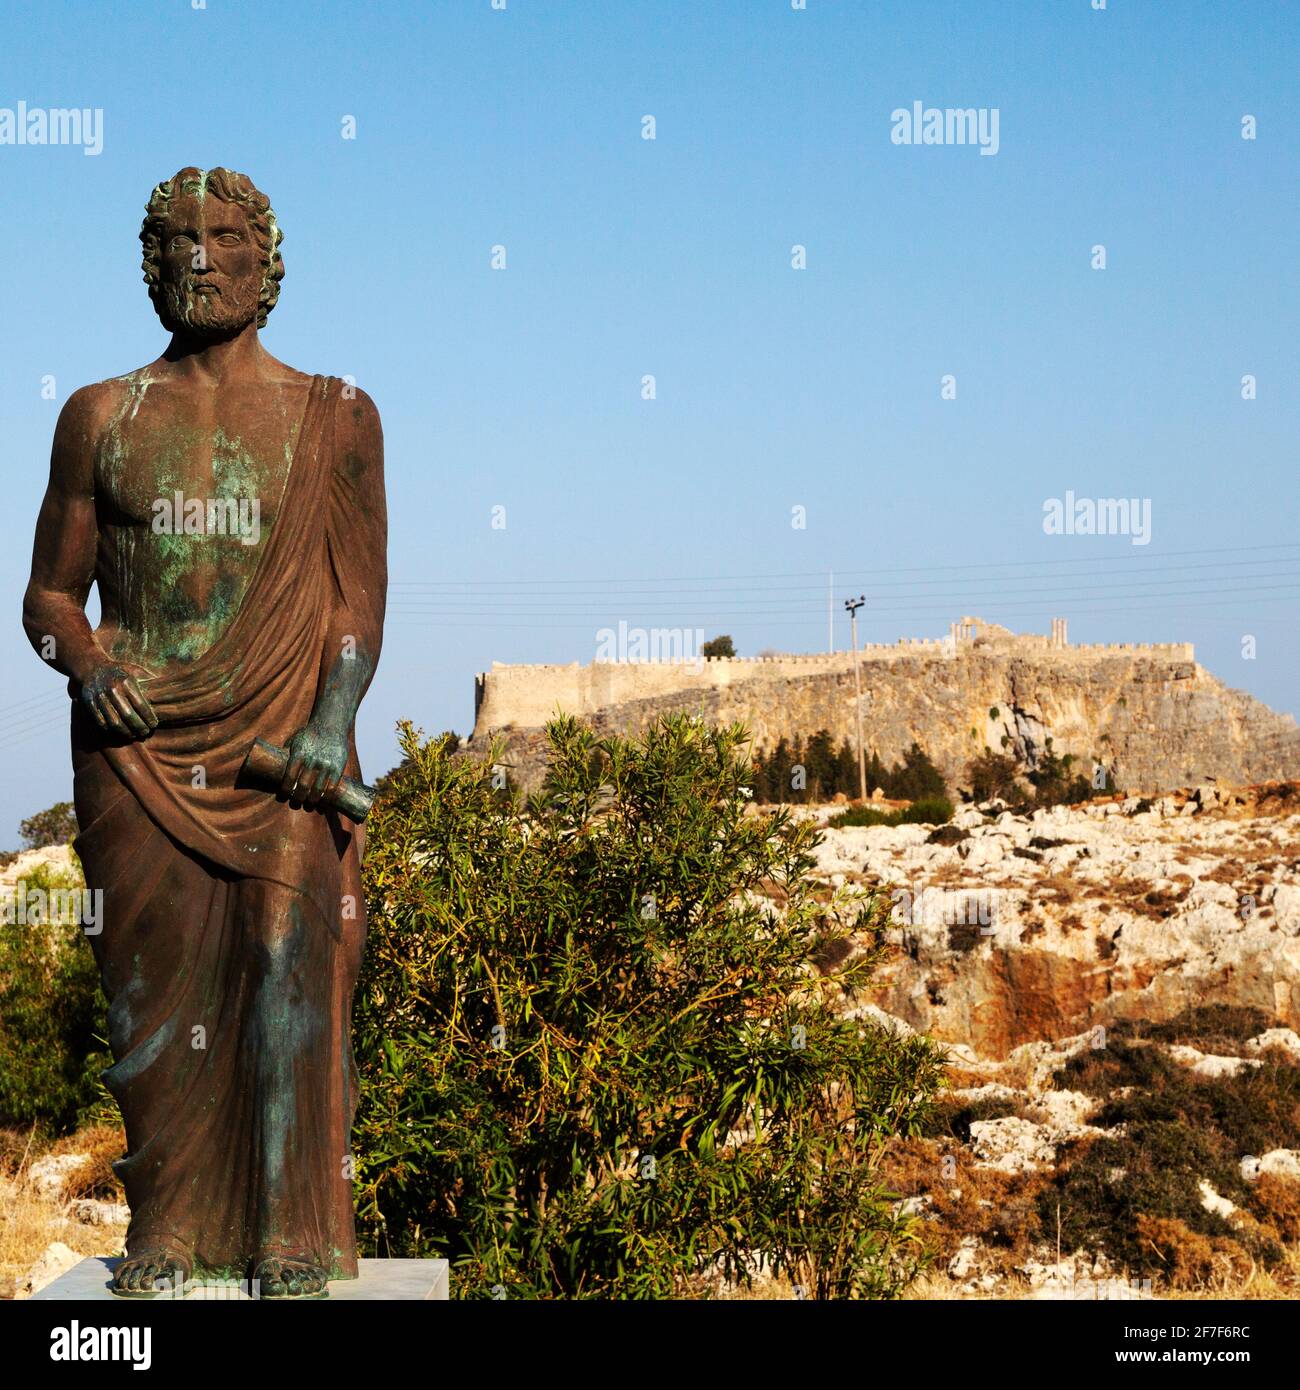 Statue of Cleobulus, an Ancient Greek poet and Philosopher, in Lindos on Rhodes, Greece. Cleobulus is regarded one of the Seven Sages of Ancient Greec Stock Photo